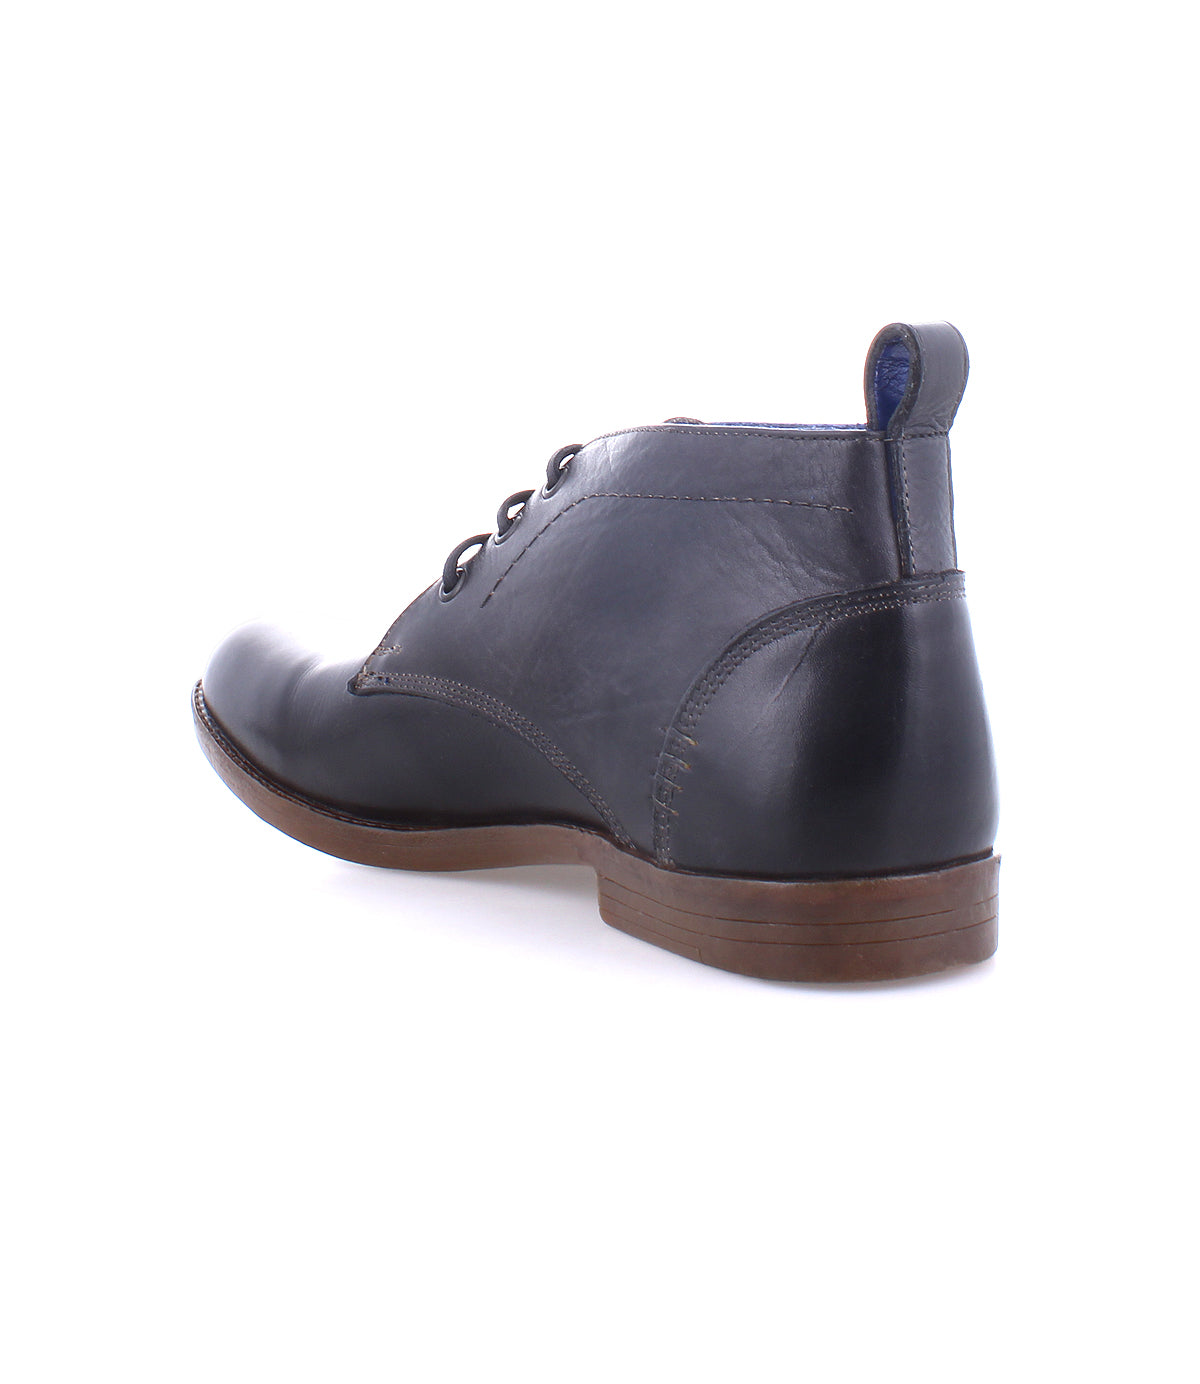 A single Illiad Teak Rustic Boot from Bed Stu, a dark blue leather chukka boot with laces, viewed from the side, against a white background.